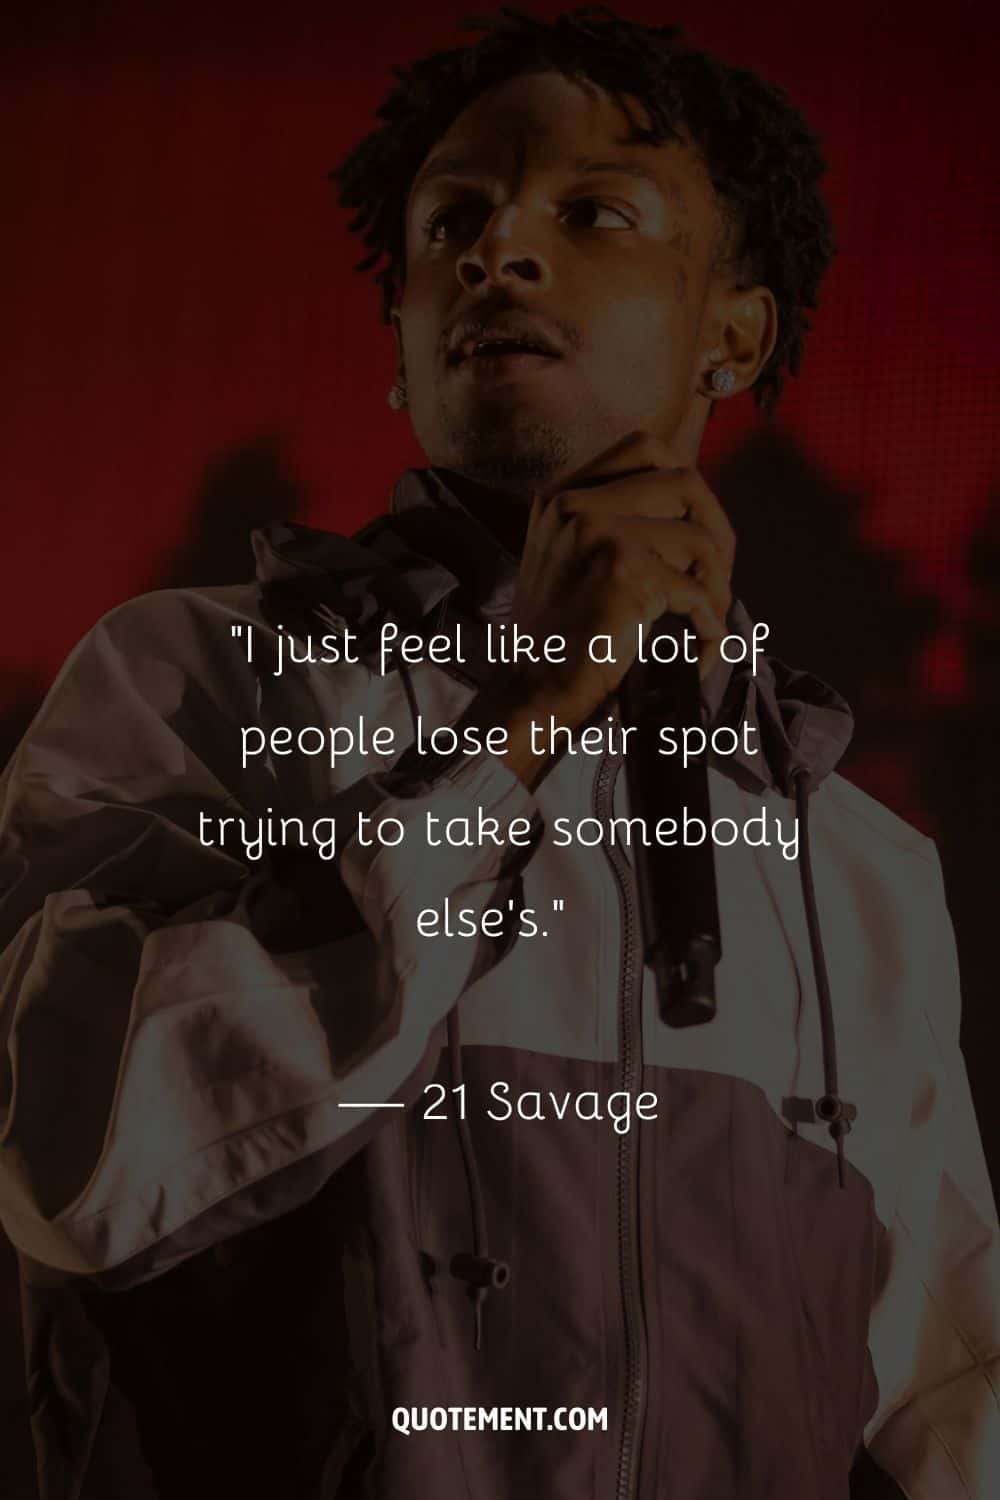 Image of 21 Savage representing the best 21 Savage quote.